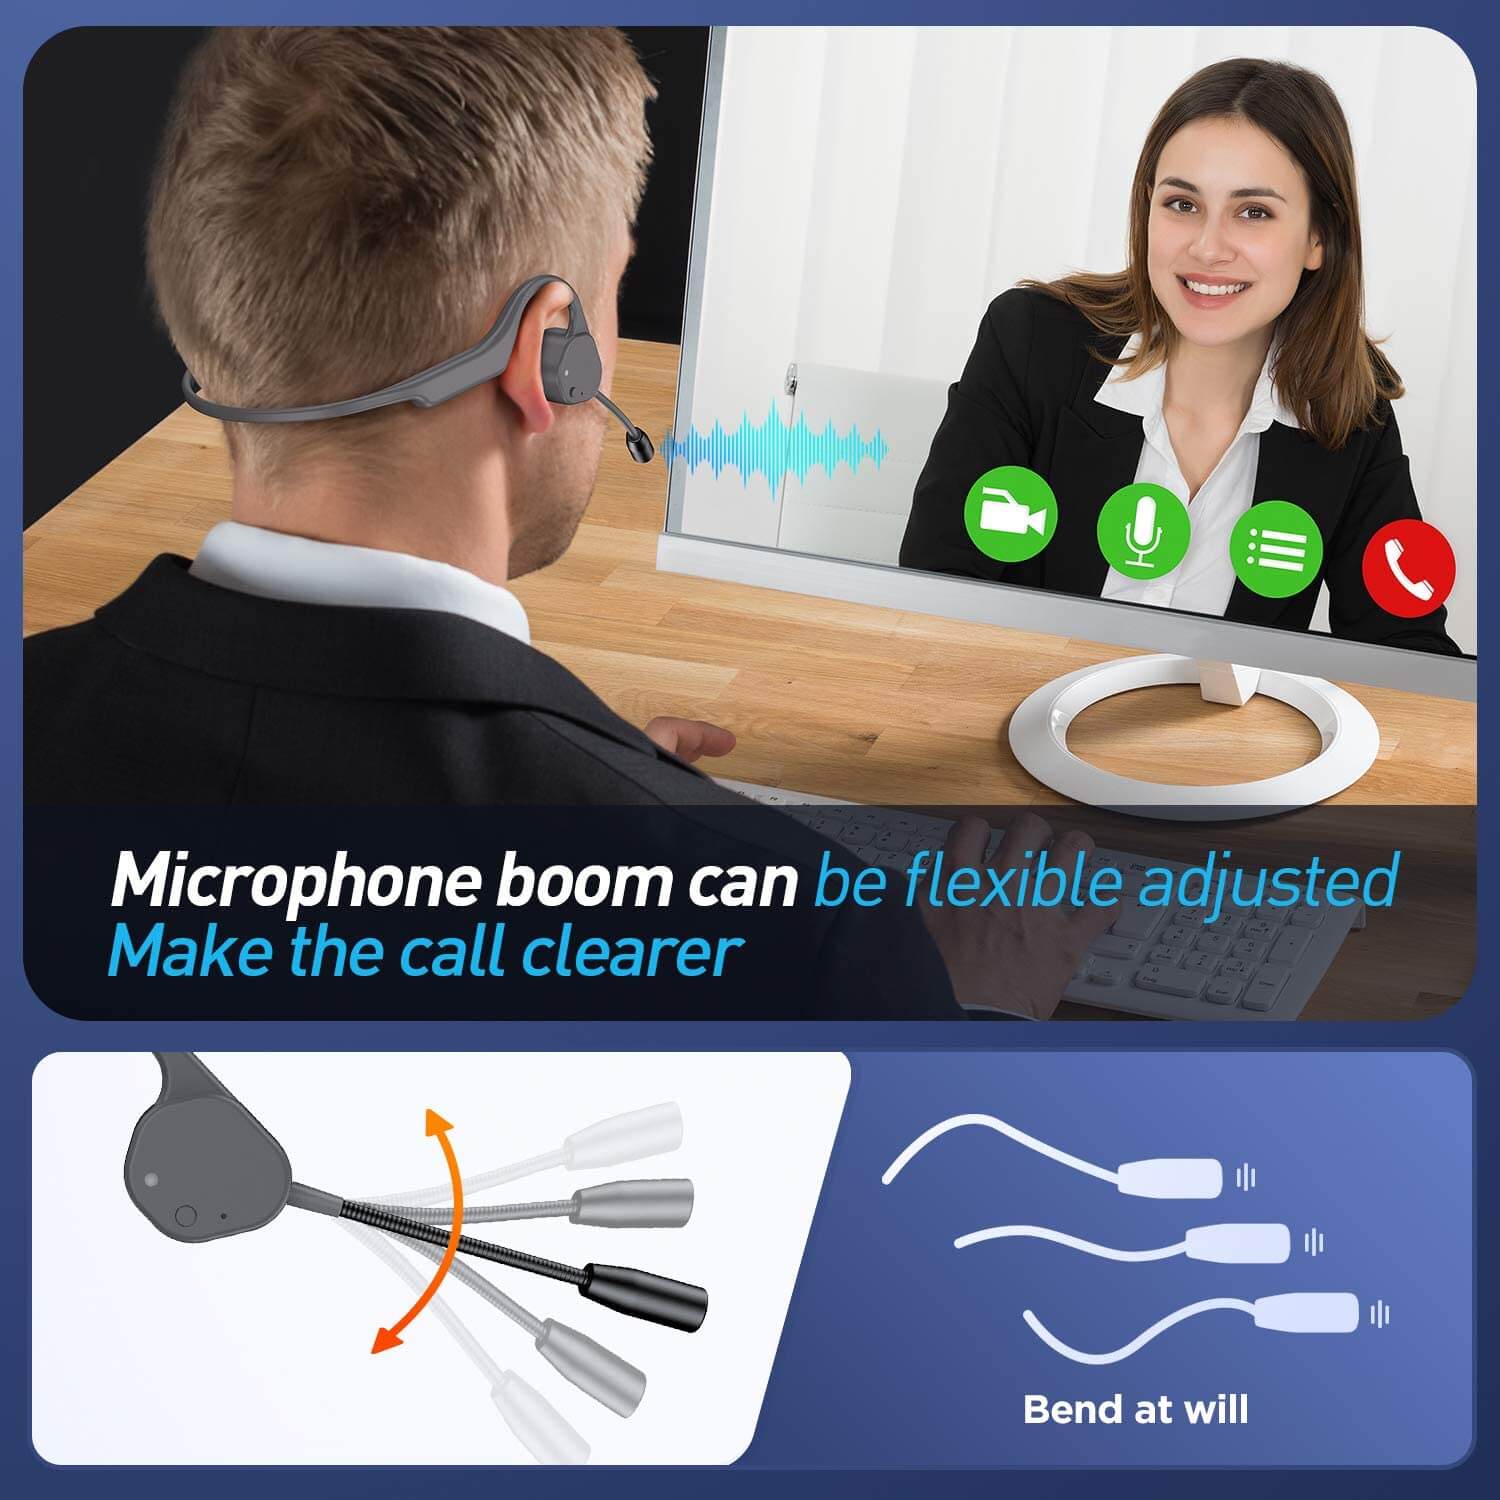 a online video call using the vidonn f3 headset, with a flexible and adjustable boom mic